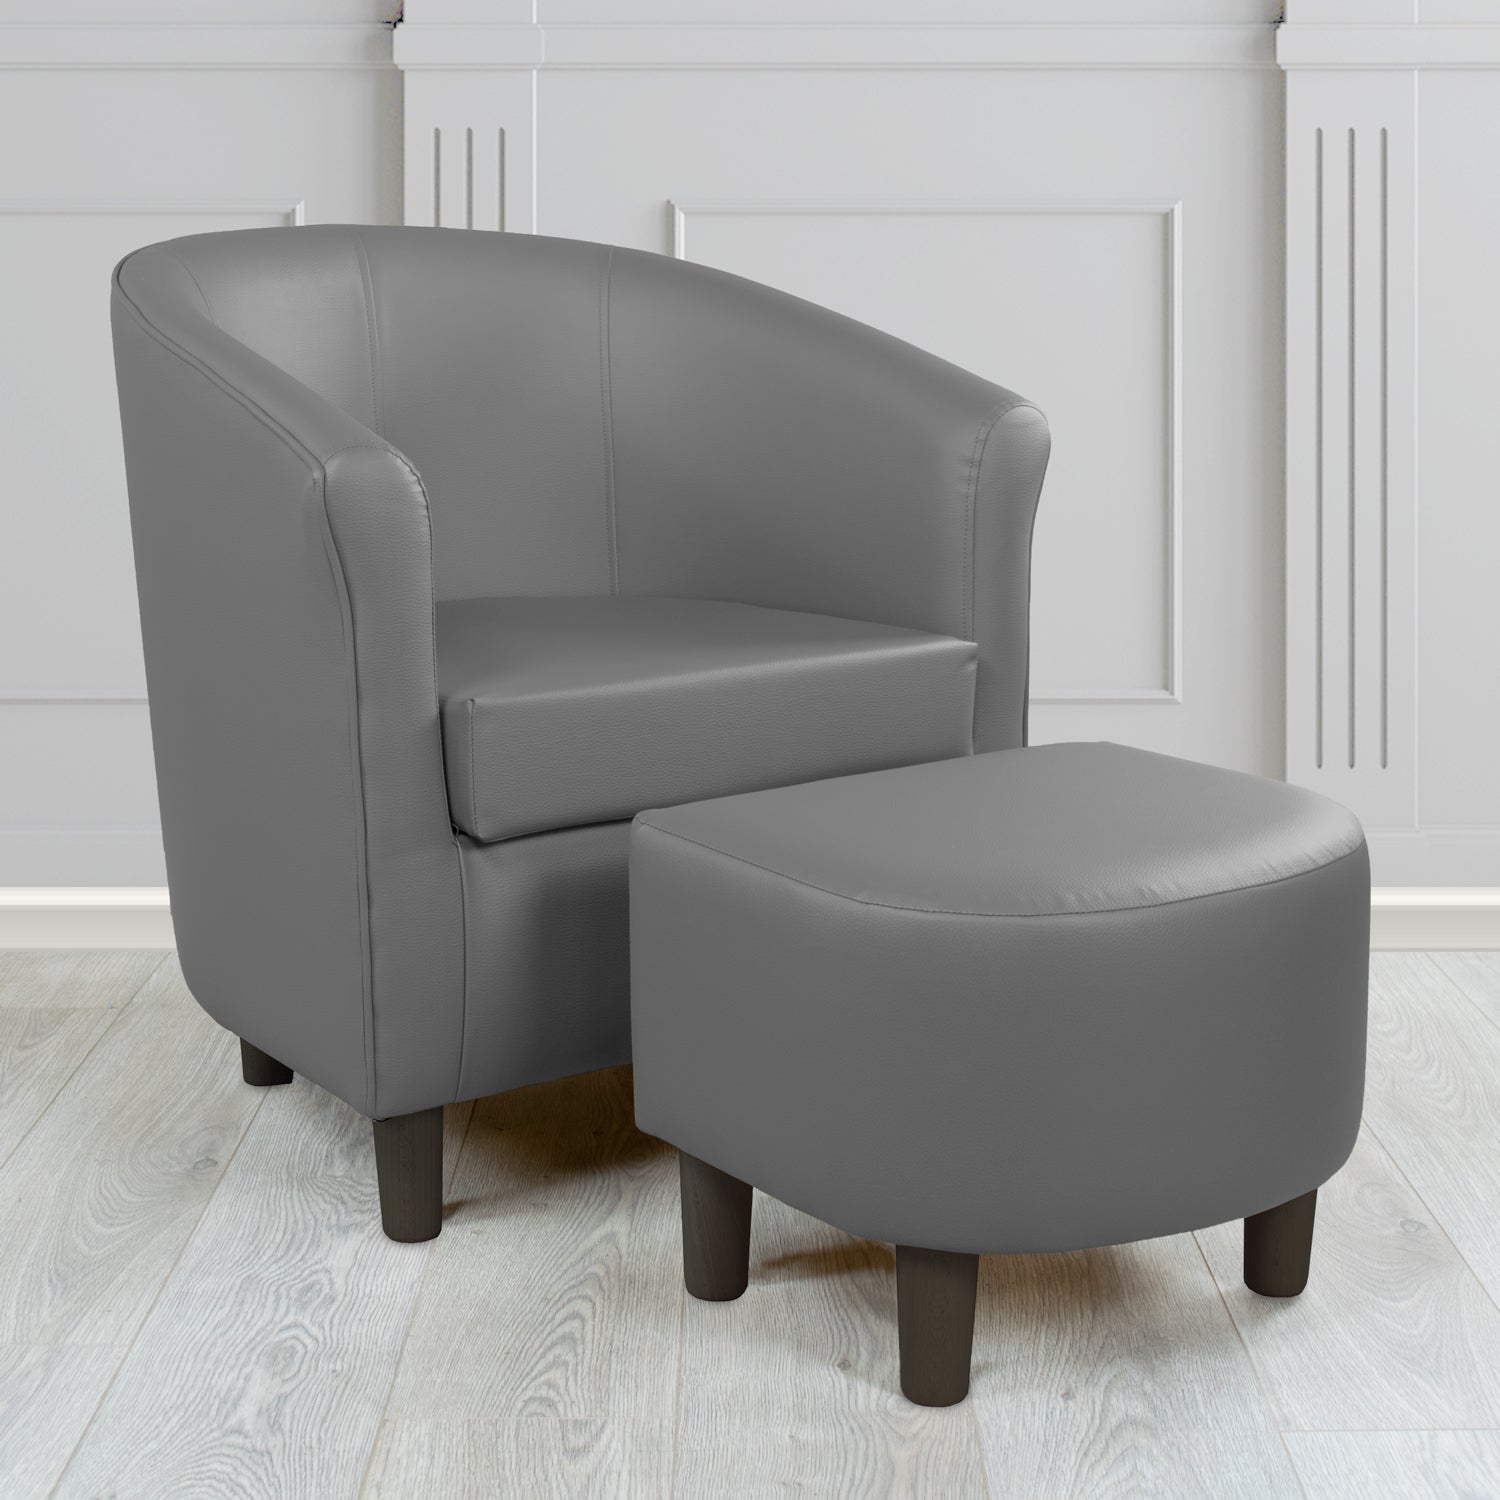 Tuscany Just Colour Greyfriar Faux Leather Tub Chair with Dee Footstool Set - The Tub Chair Shop